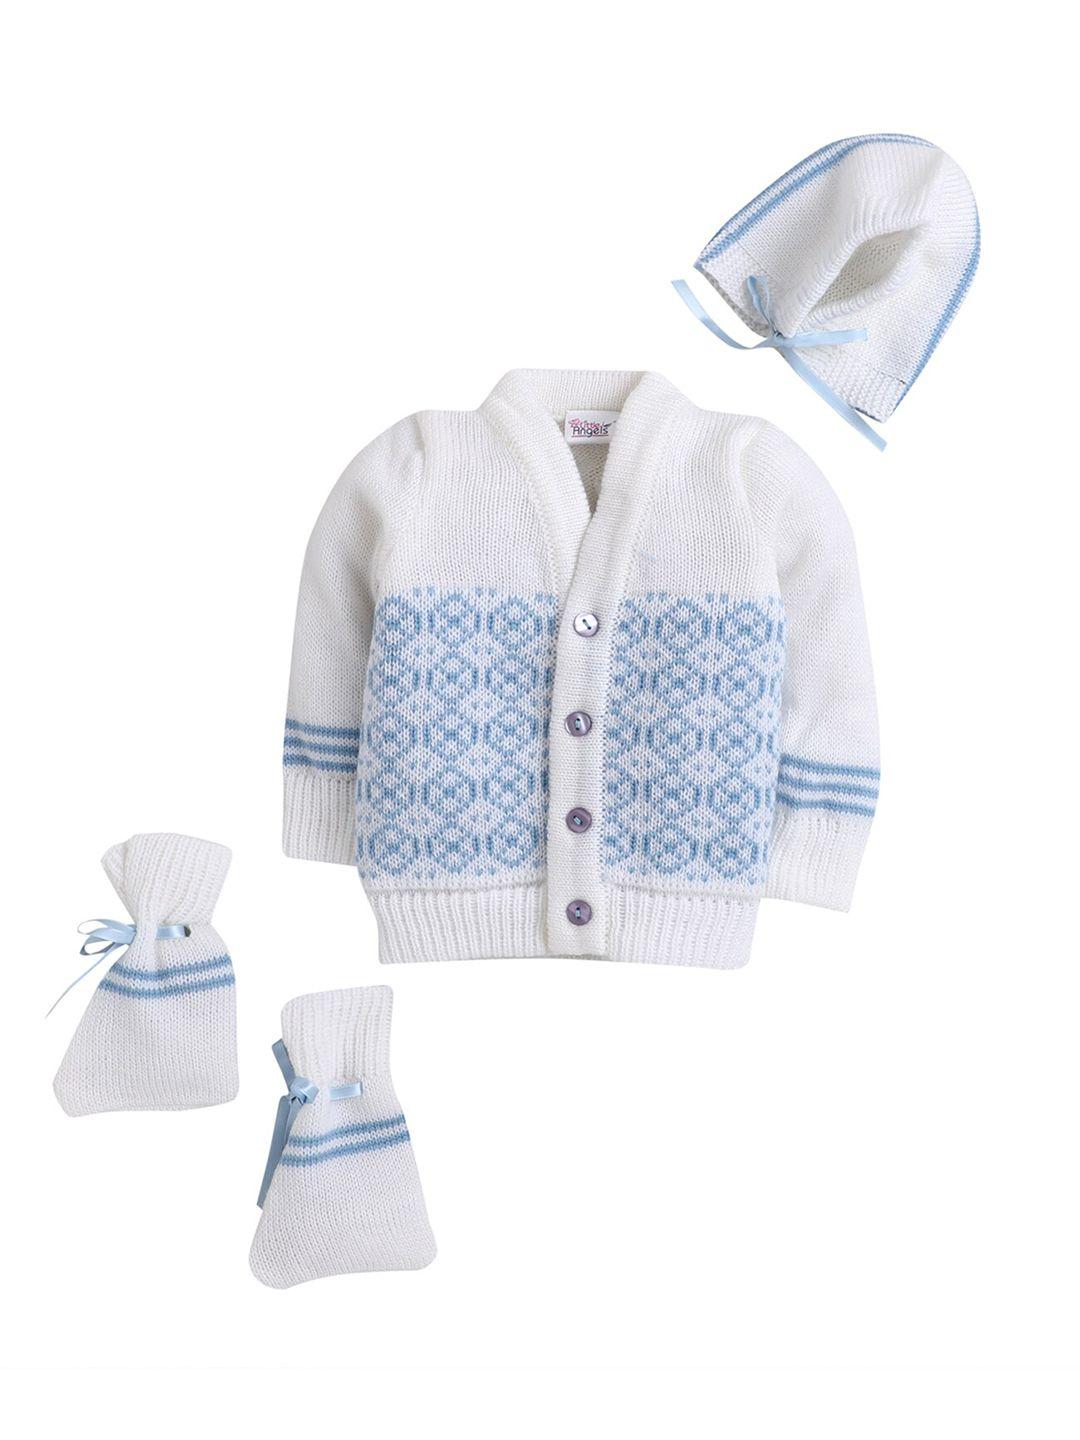 little angels boys blue & white cable knit cardigan matching cap and socks